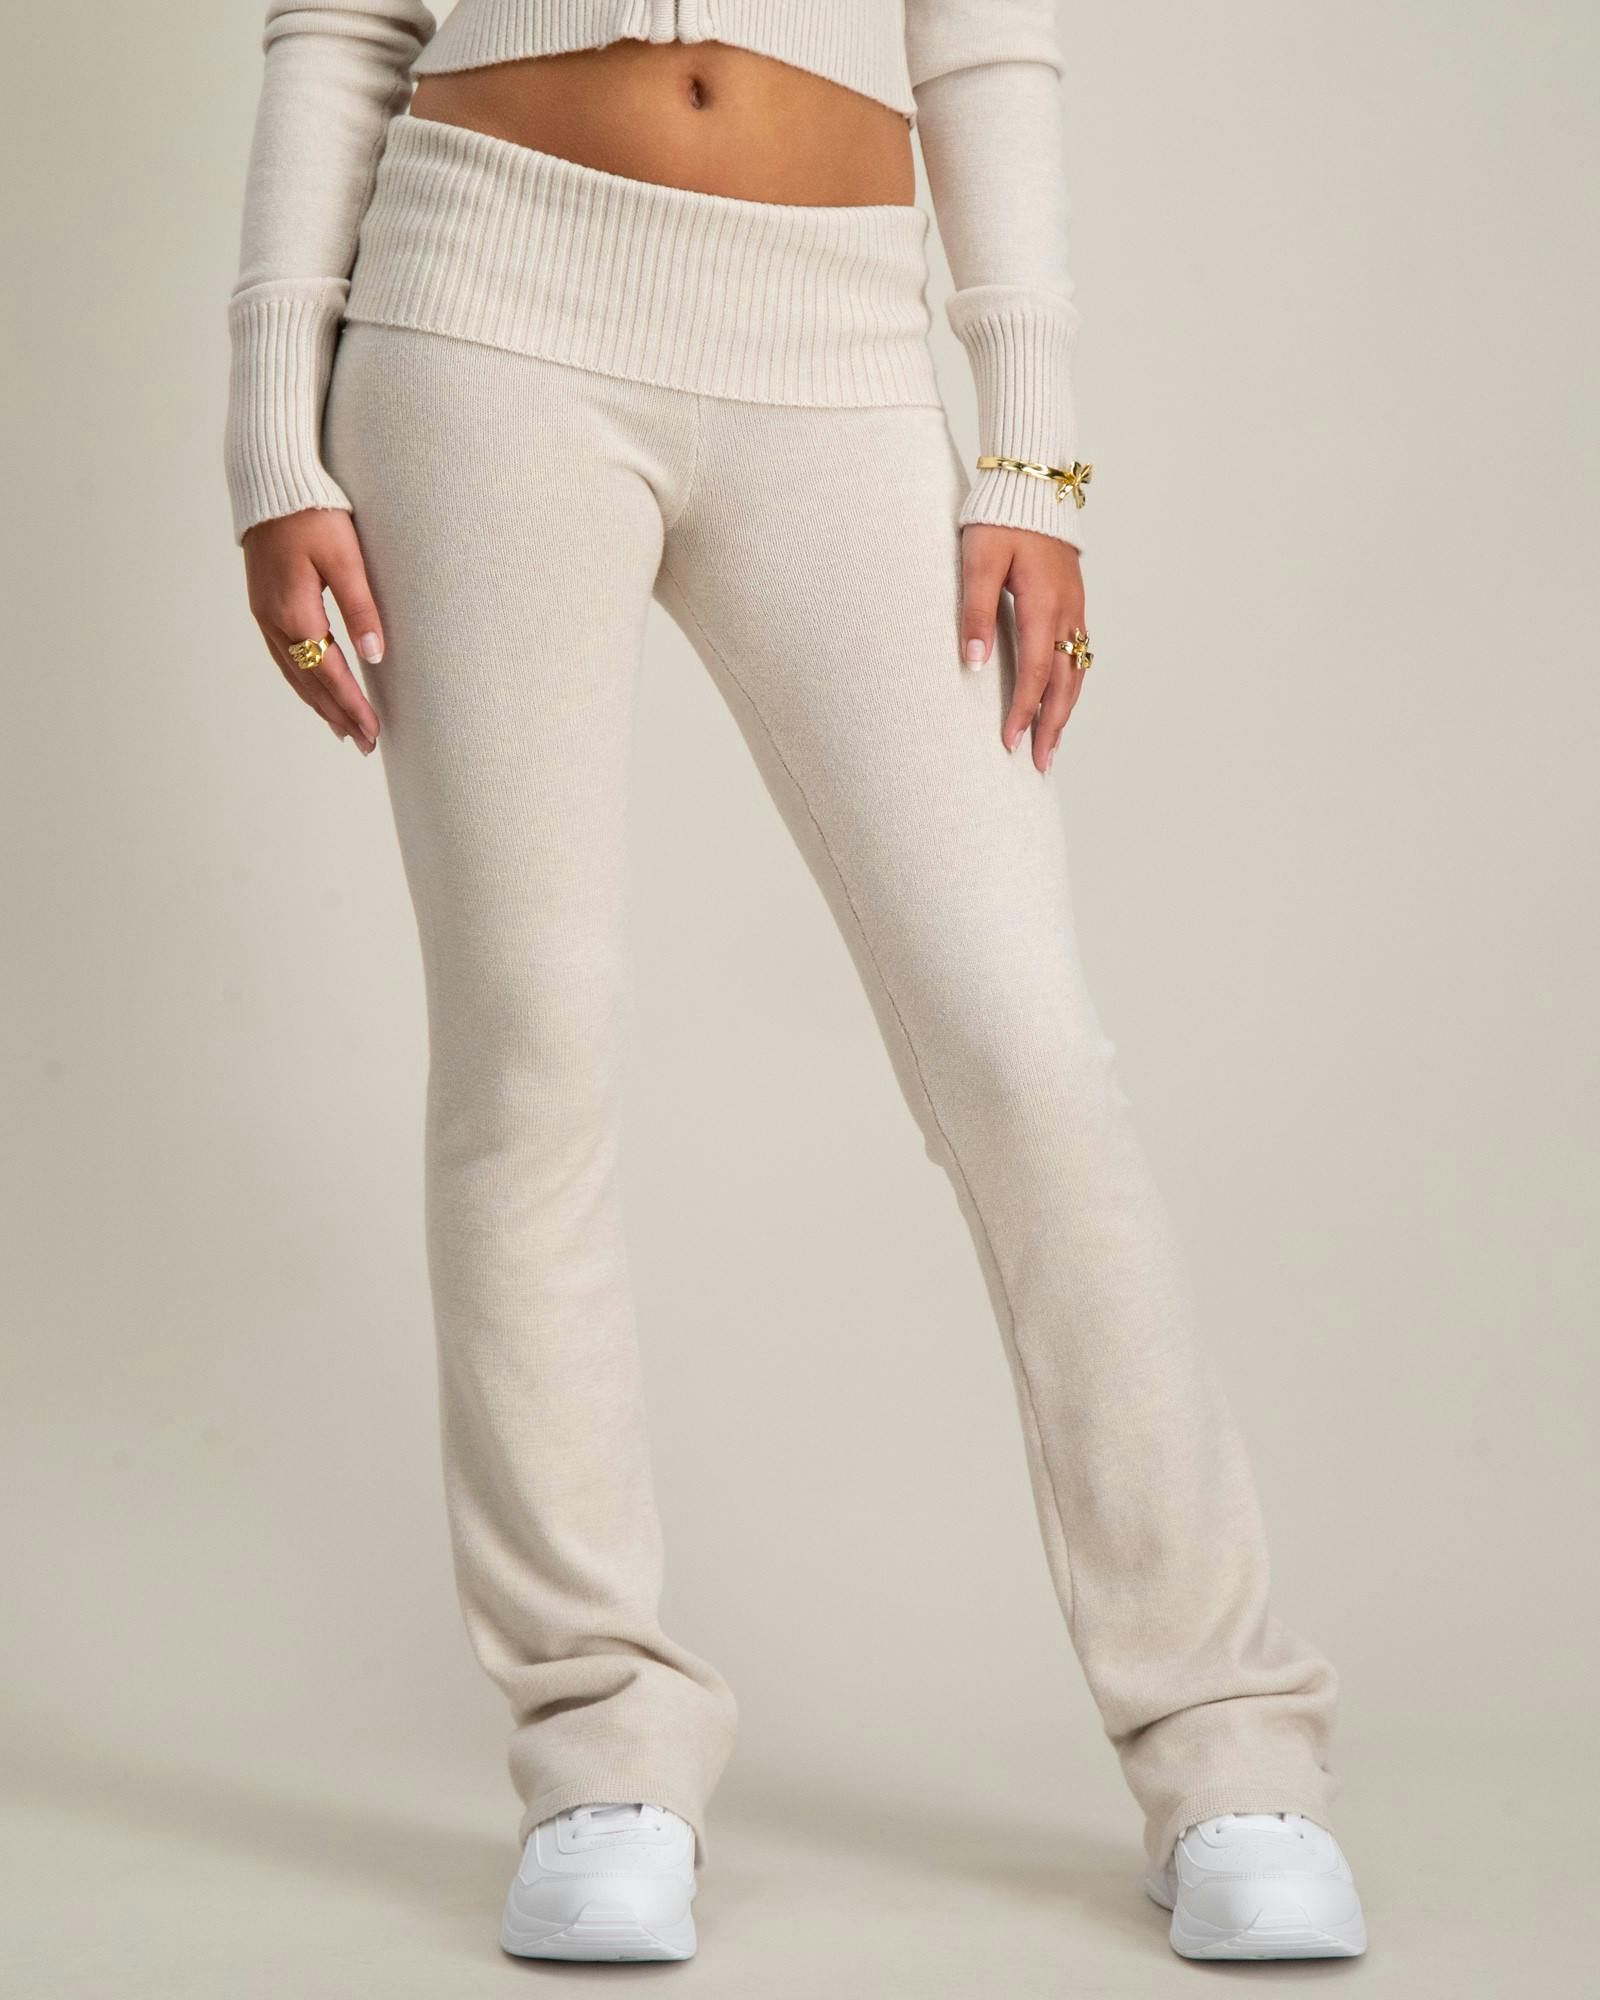 Y knitted yoga pants